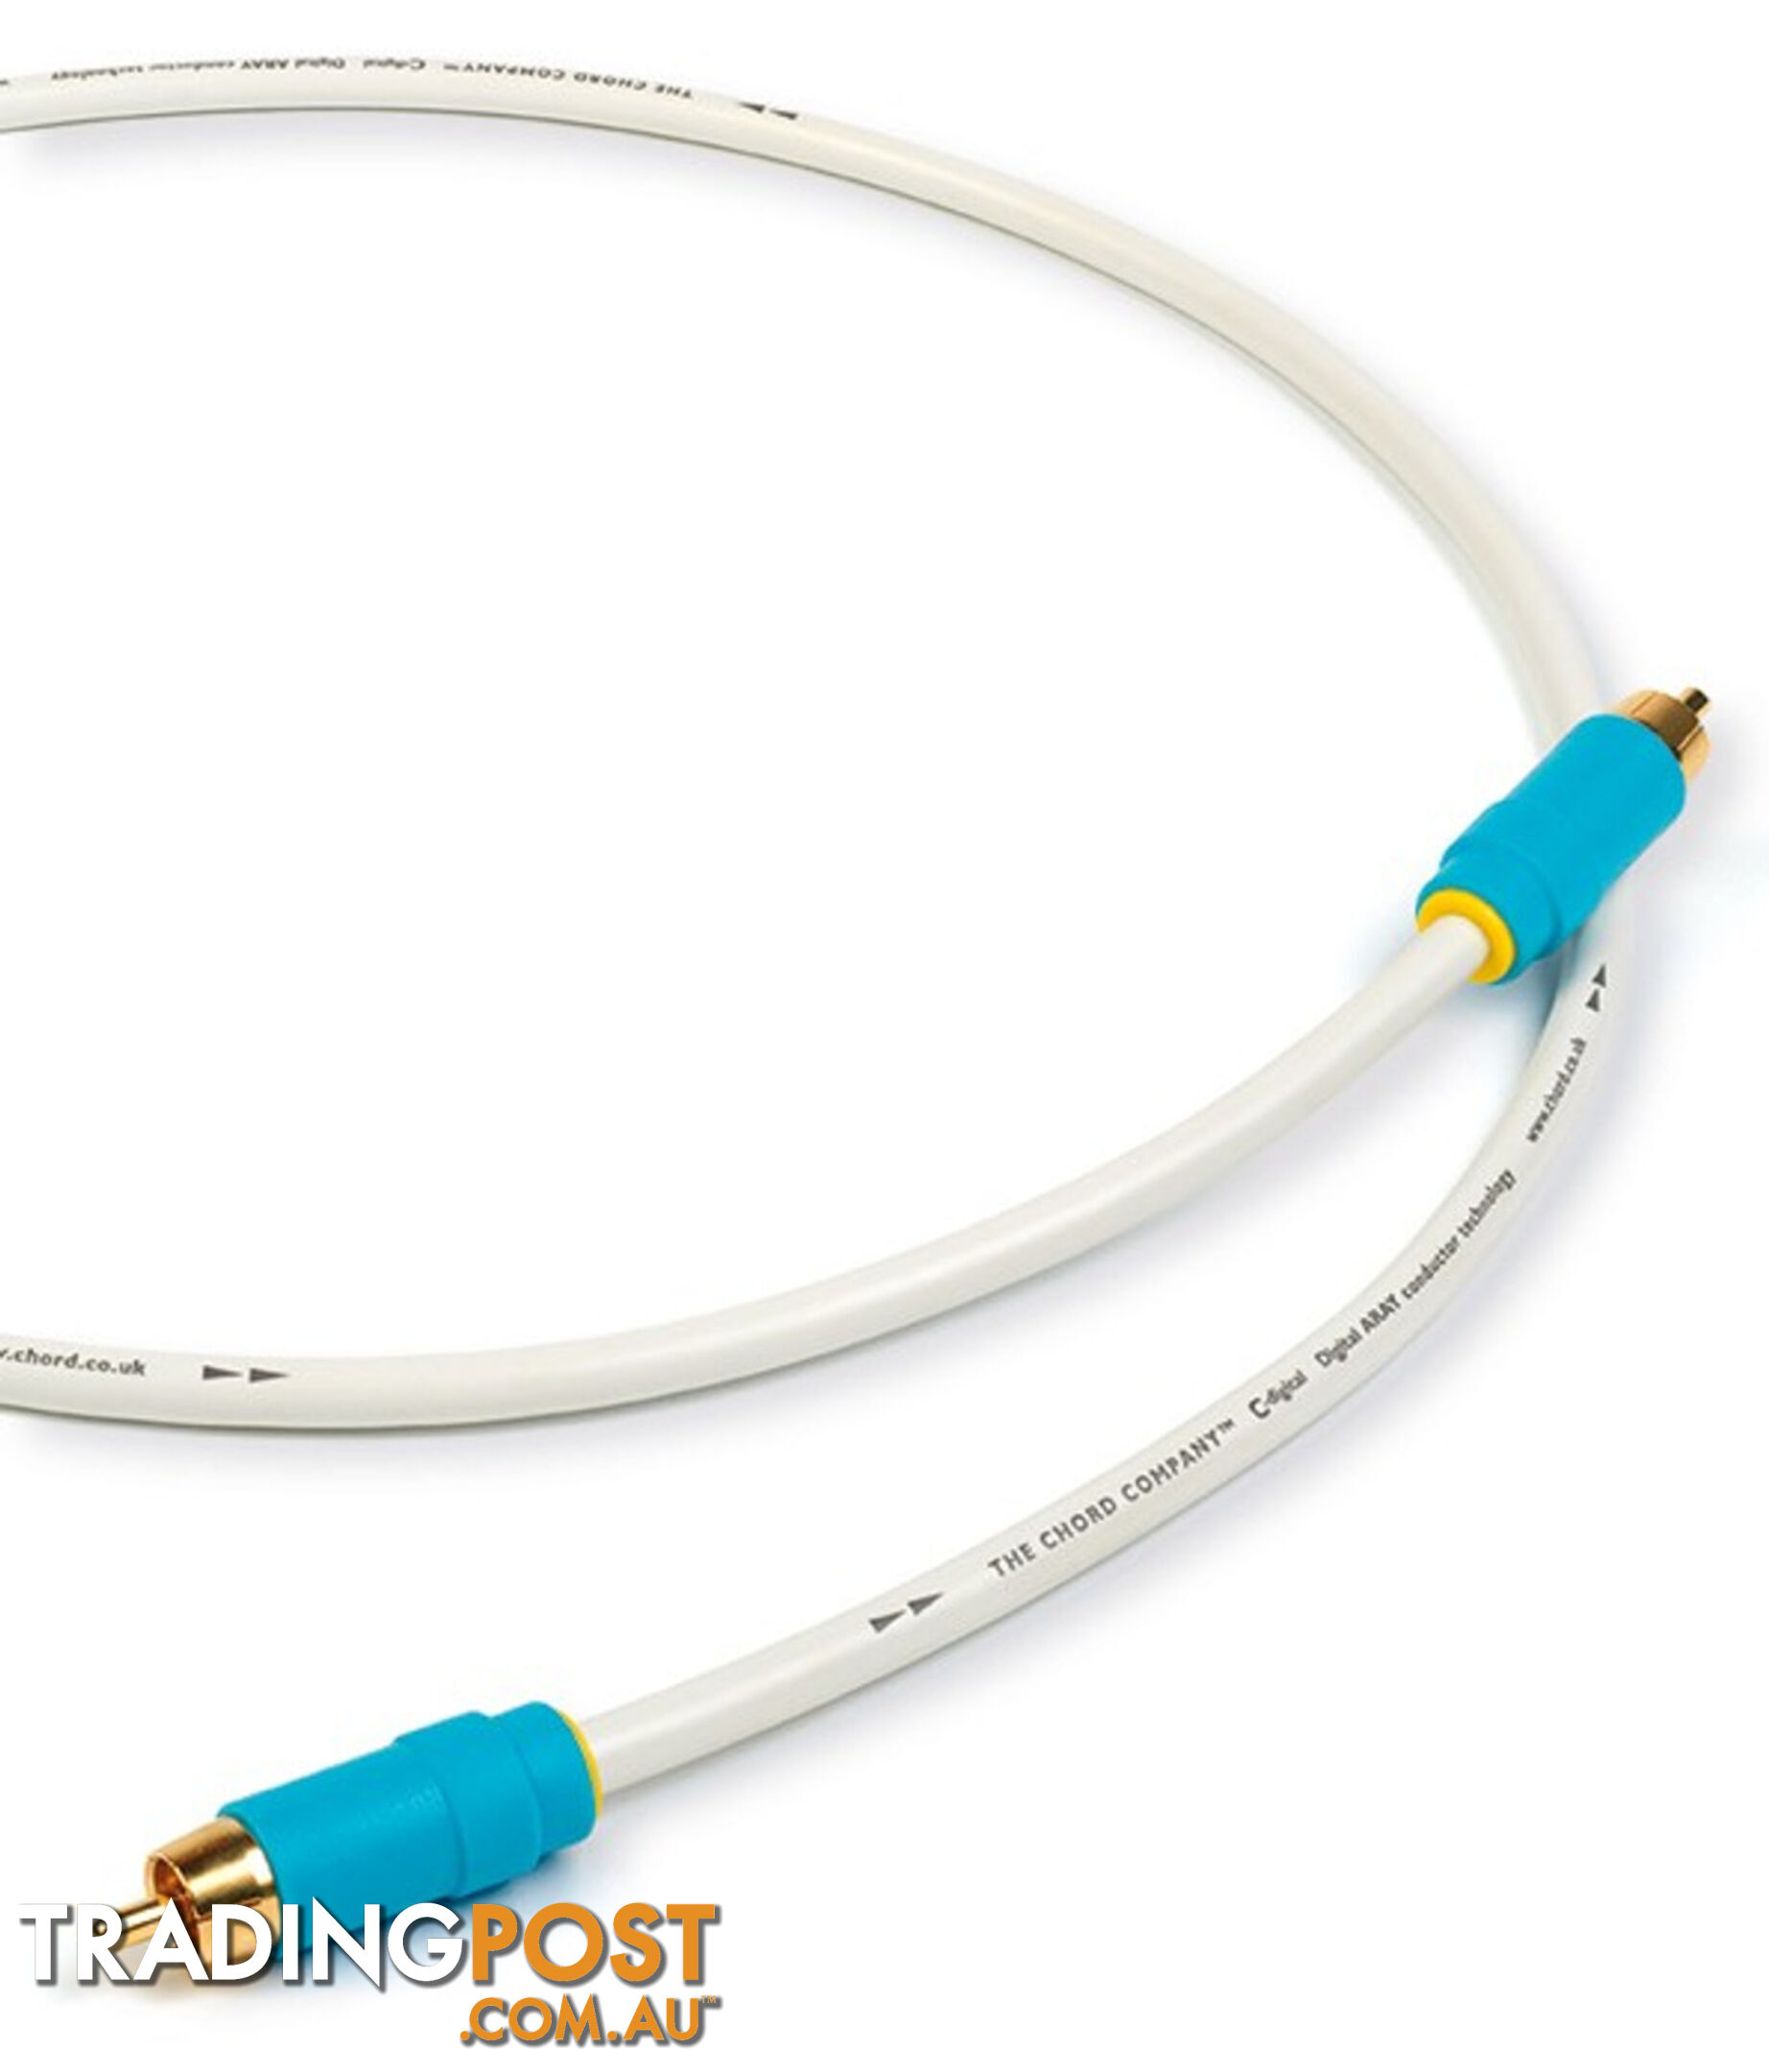 Chord C-Dig Coaxial Digital Cable